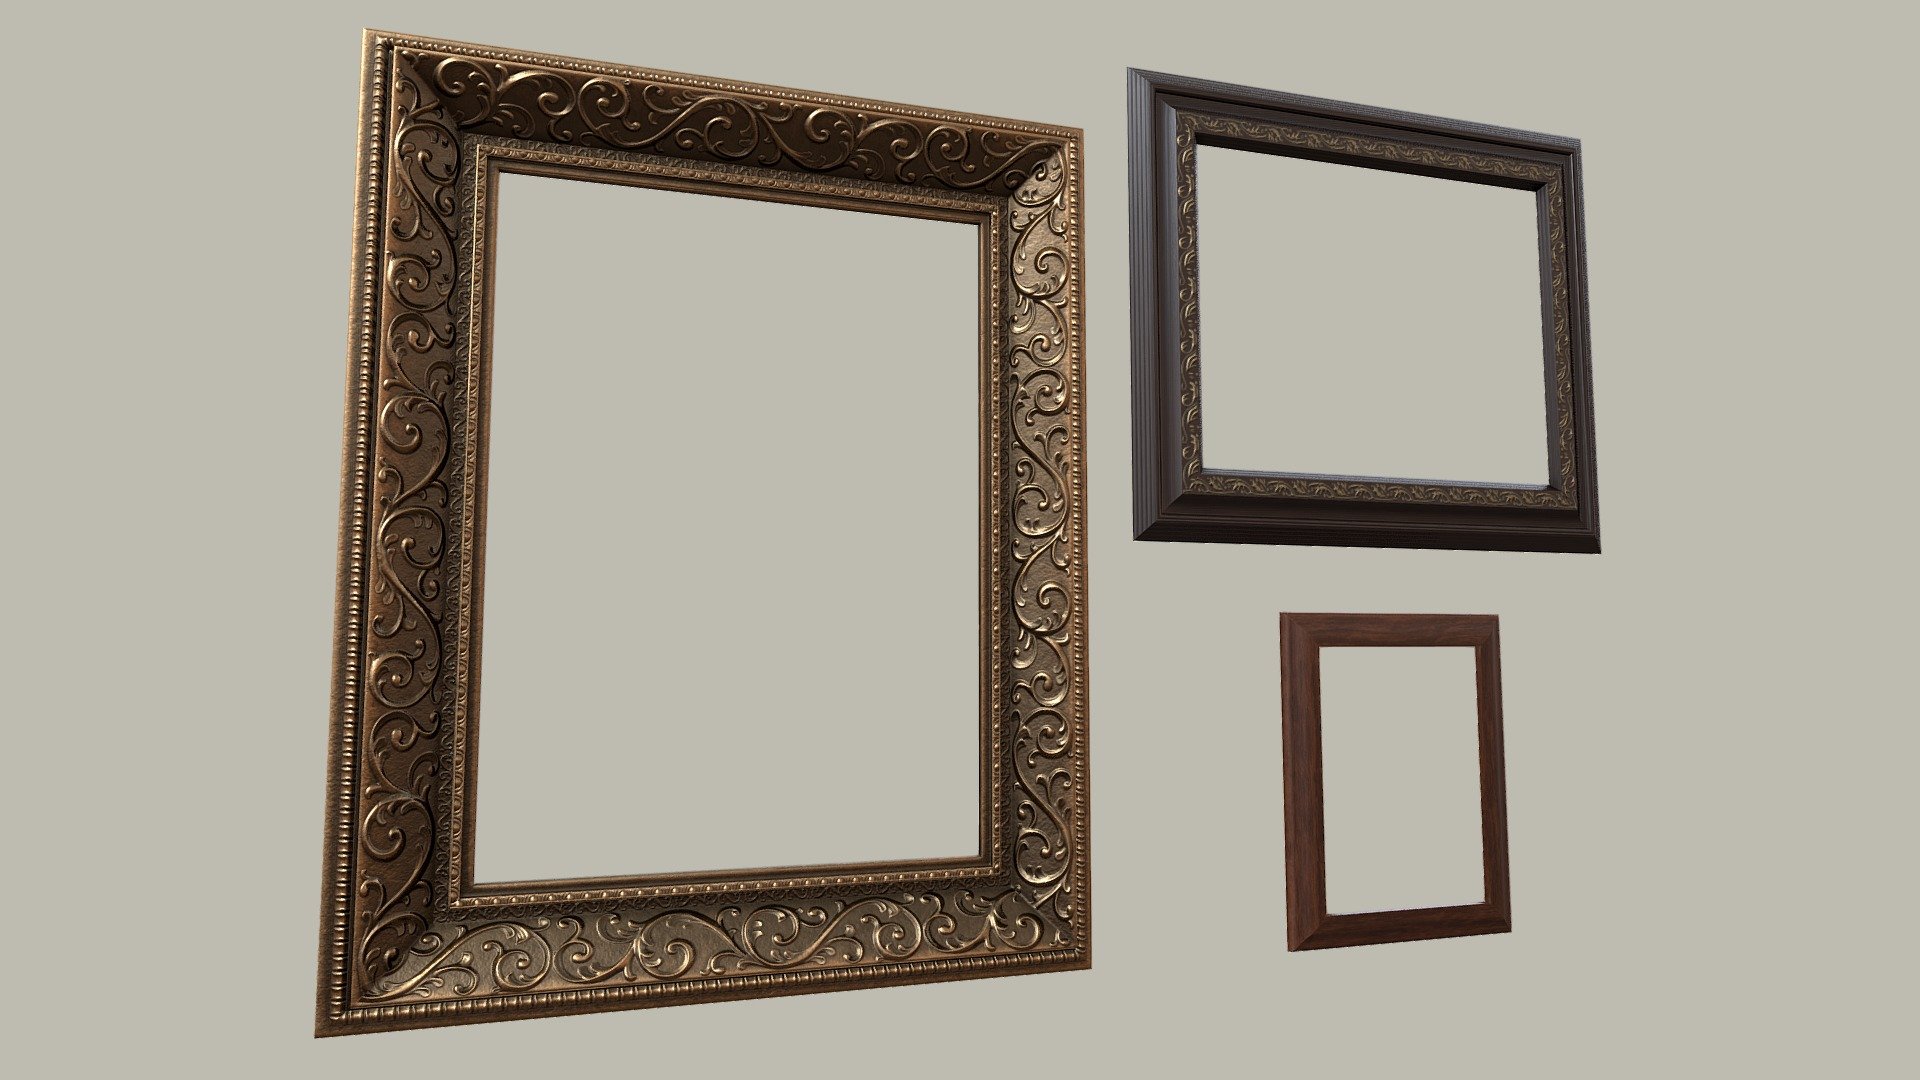 Assorted picture frames, ready to use for any archvis or realtime applications.

Contents:

frame1 (gold frame) fbx, 2k pbr set, ARM texture (R - AO, G - Metalness, B - Roughness)

frame2 (black and gold frame) fbx, 2k pbr set, ARM texture (R - AO, G - Metalness, B - Roughness)

frame3 (wood frame) fbx, 1k pbr set, ARM texture (R - AO, G - Metalness, B - Roughness)

Comment if you have any questions 3d model